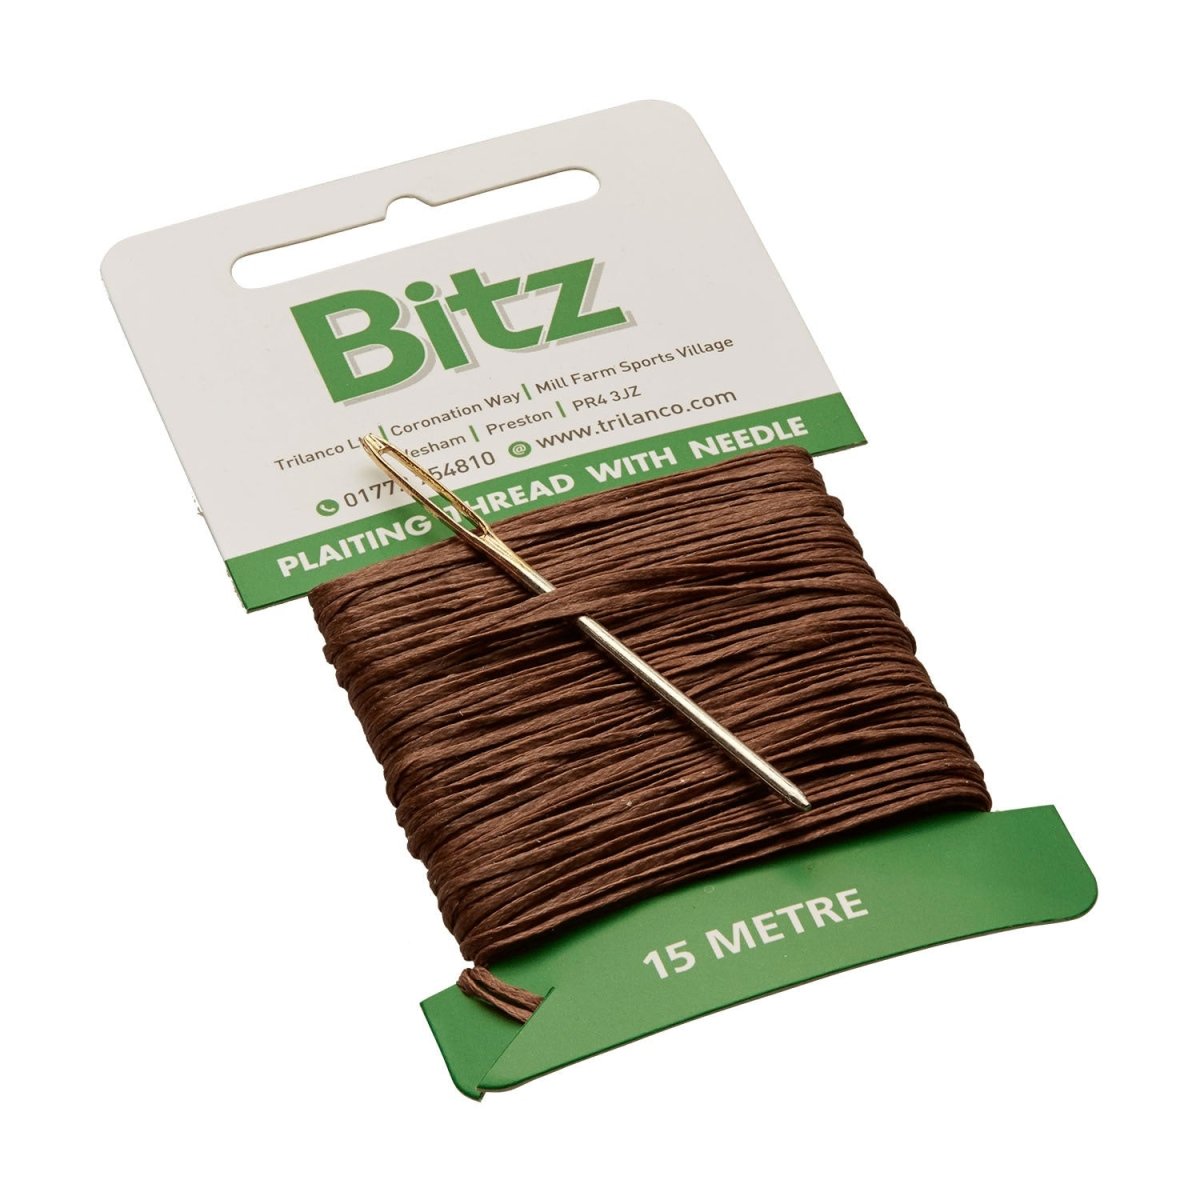 Bitz Plaiting Card With Needle - Brown - 15M